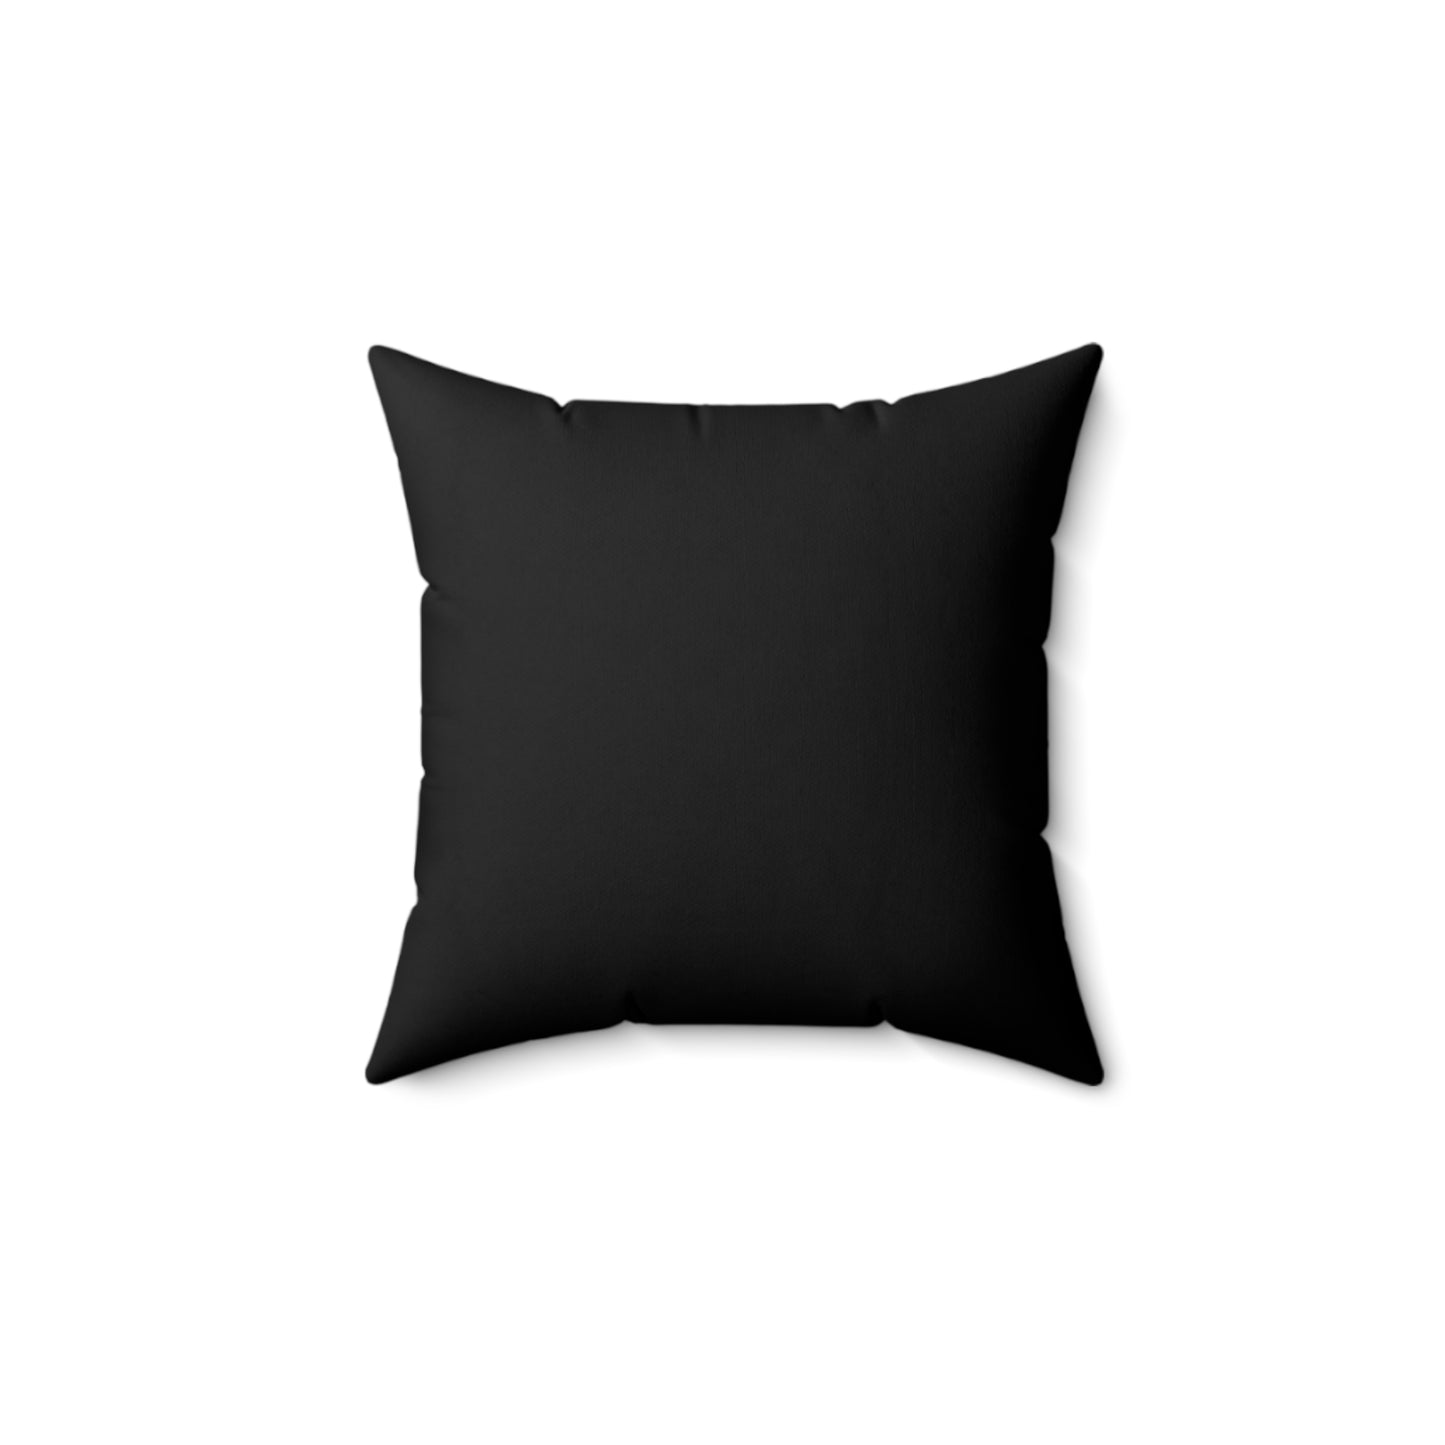 Freddy’s Sweater Throw Pillow